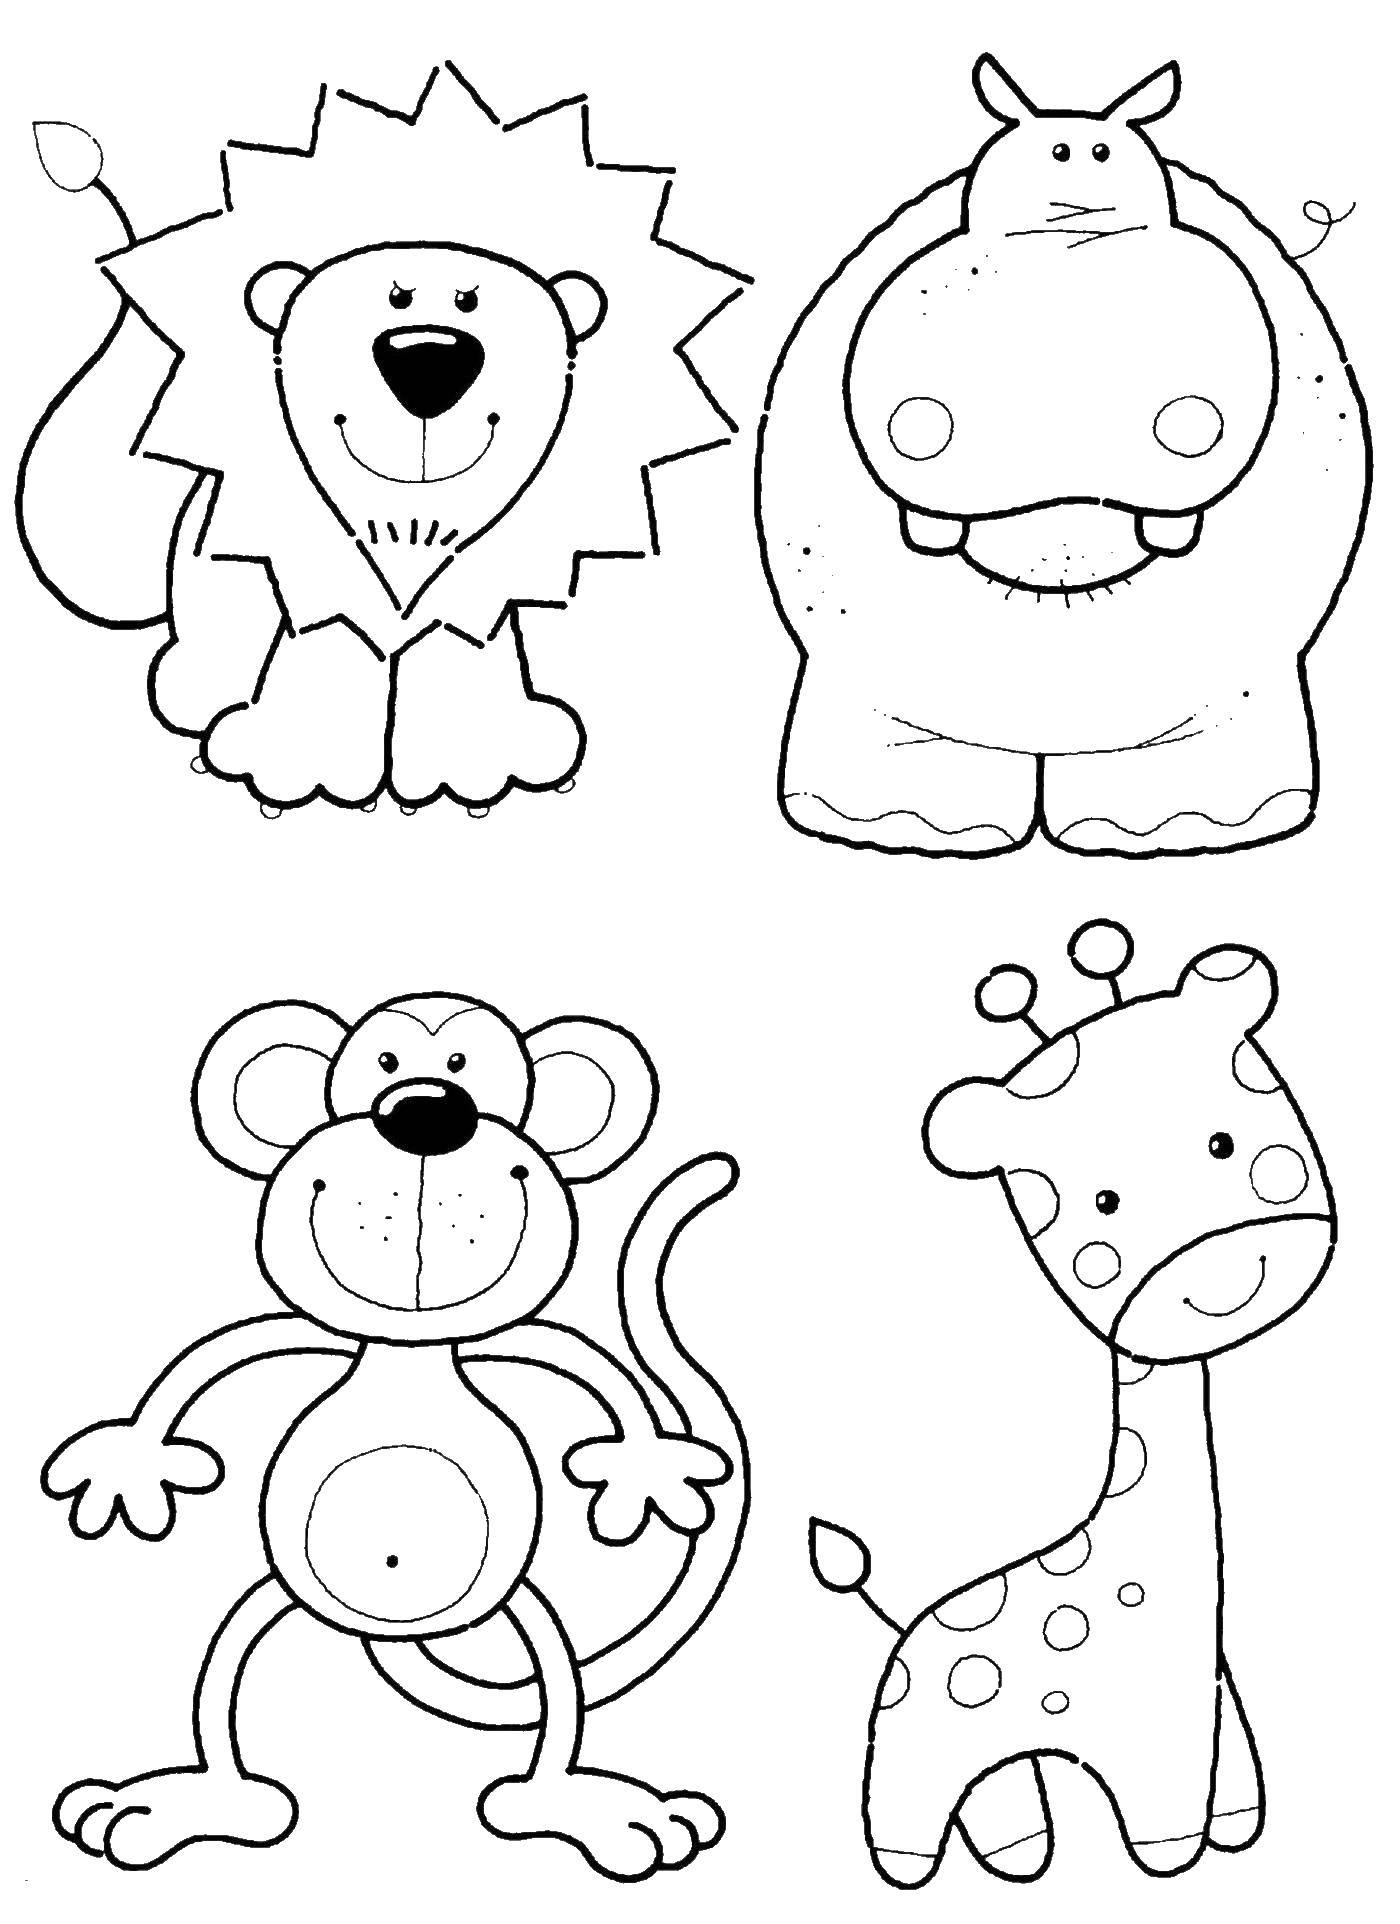 Coloring Animals lion Hippo giraffe monkey and the inhabitants of Africa. Category animals. Tags:  giraffe, lion, Hippo, monkey.